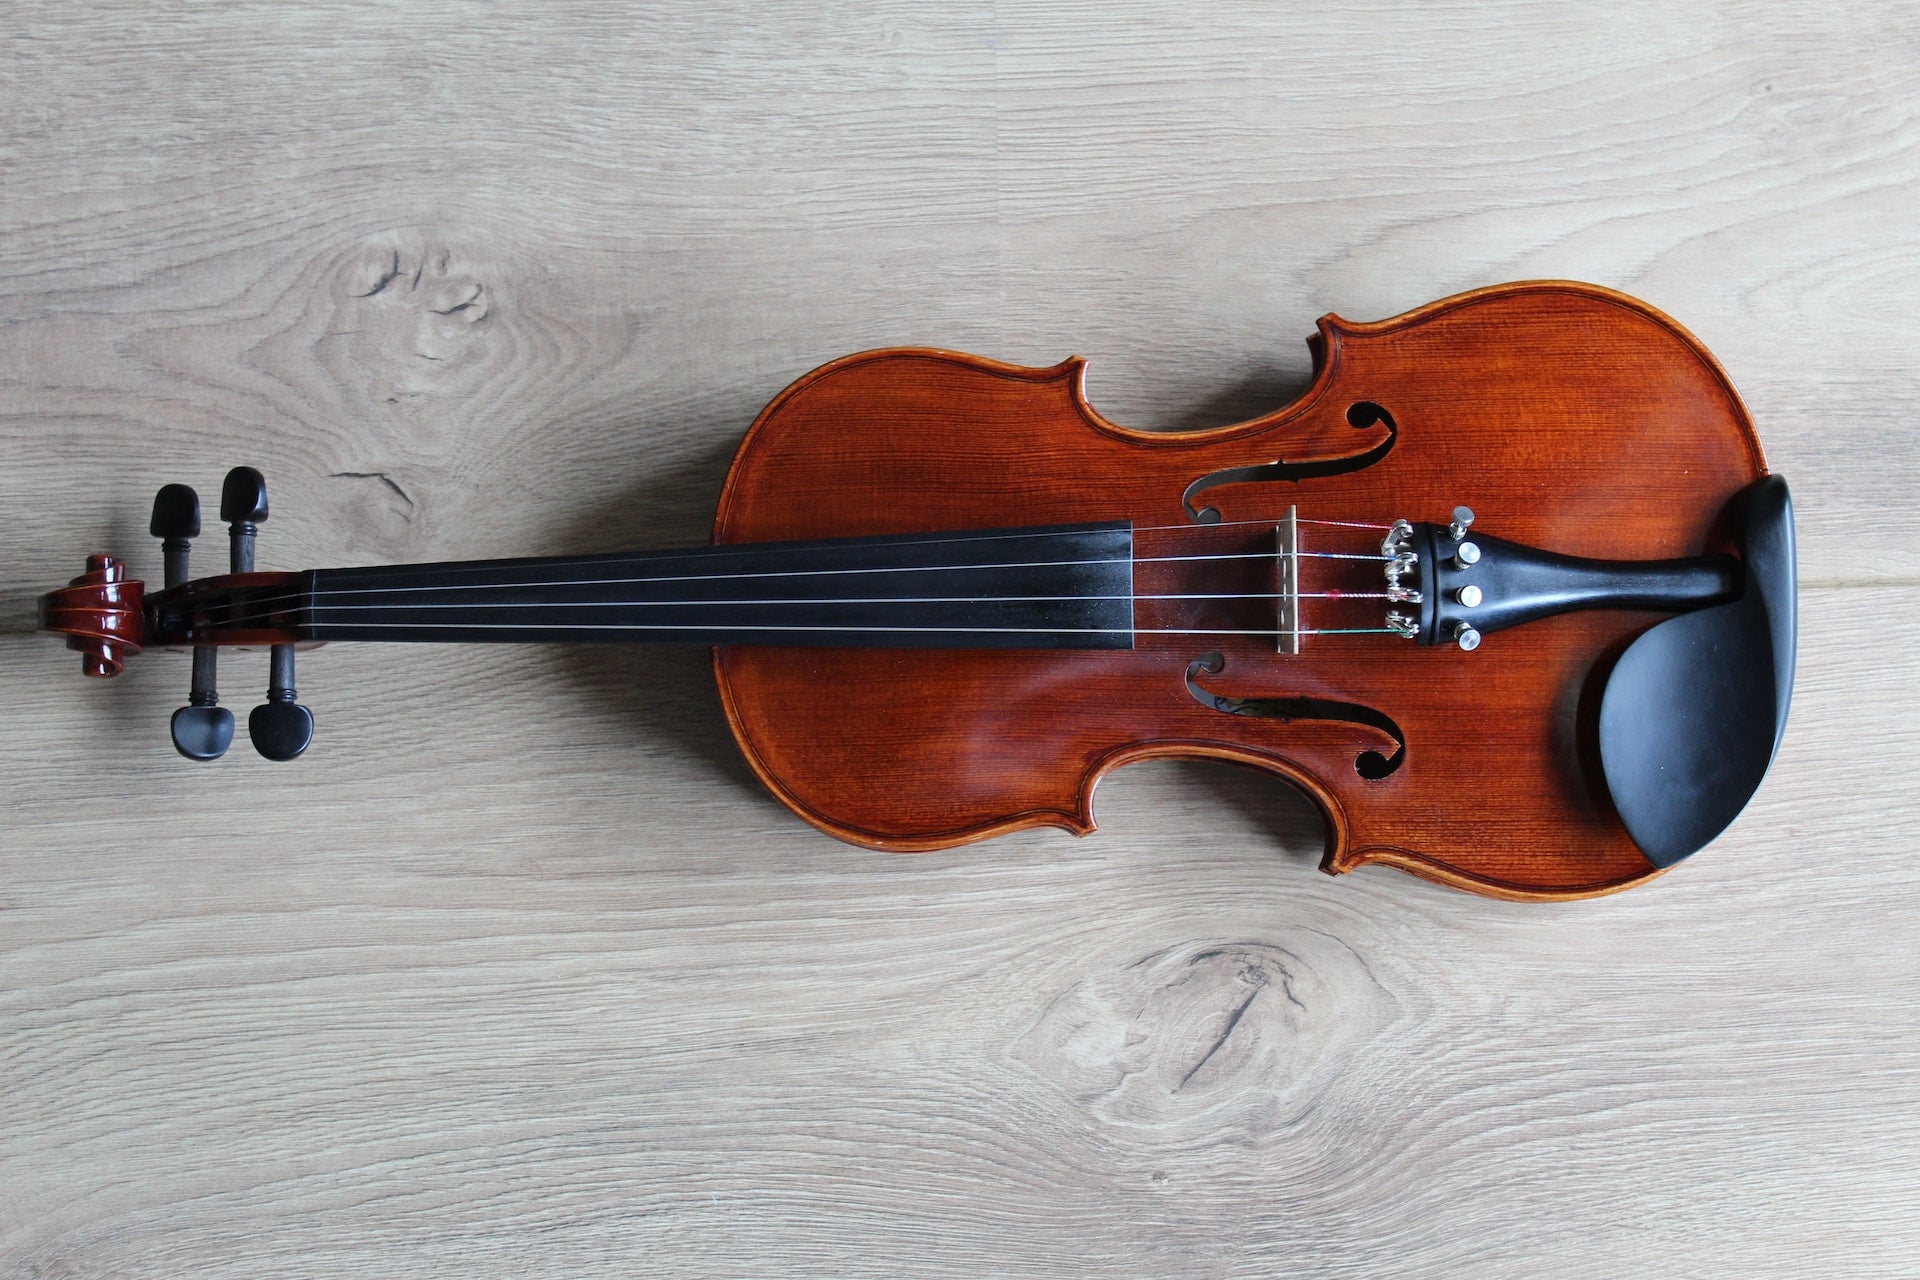 Violin String Tension - Why does it matter?